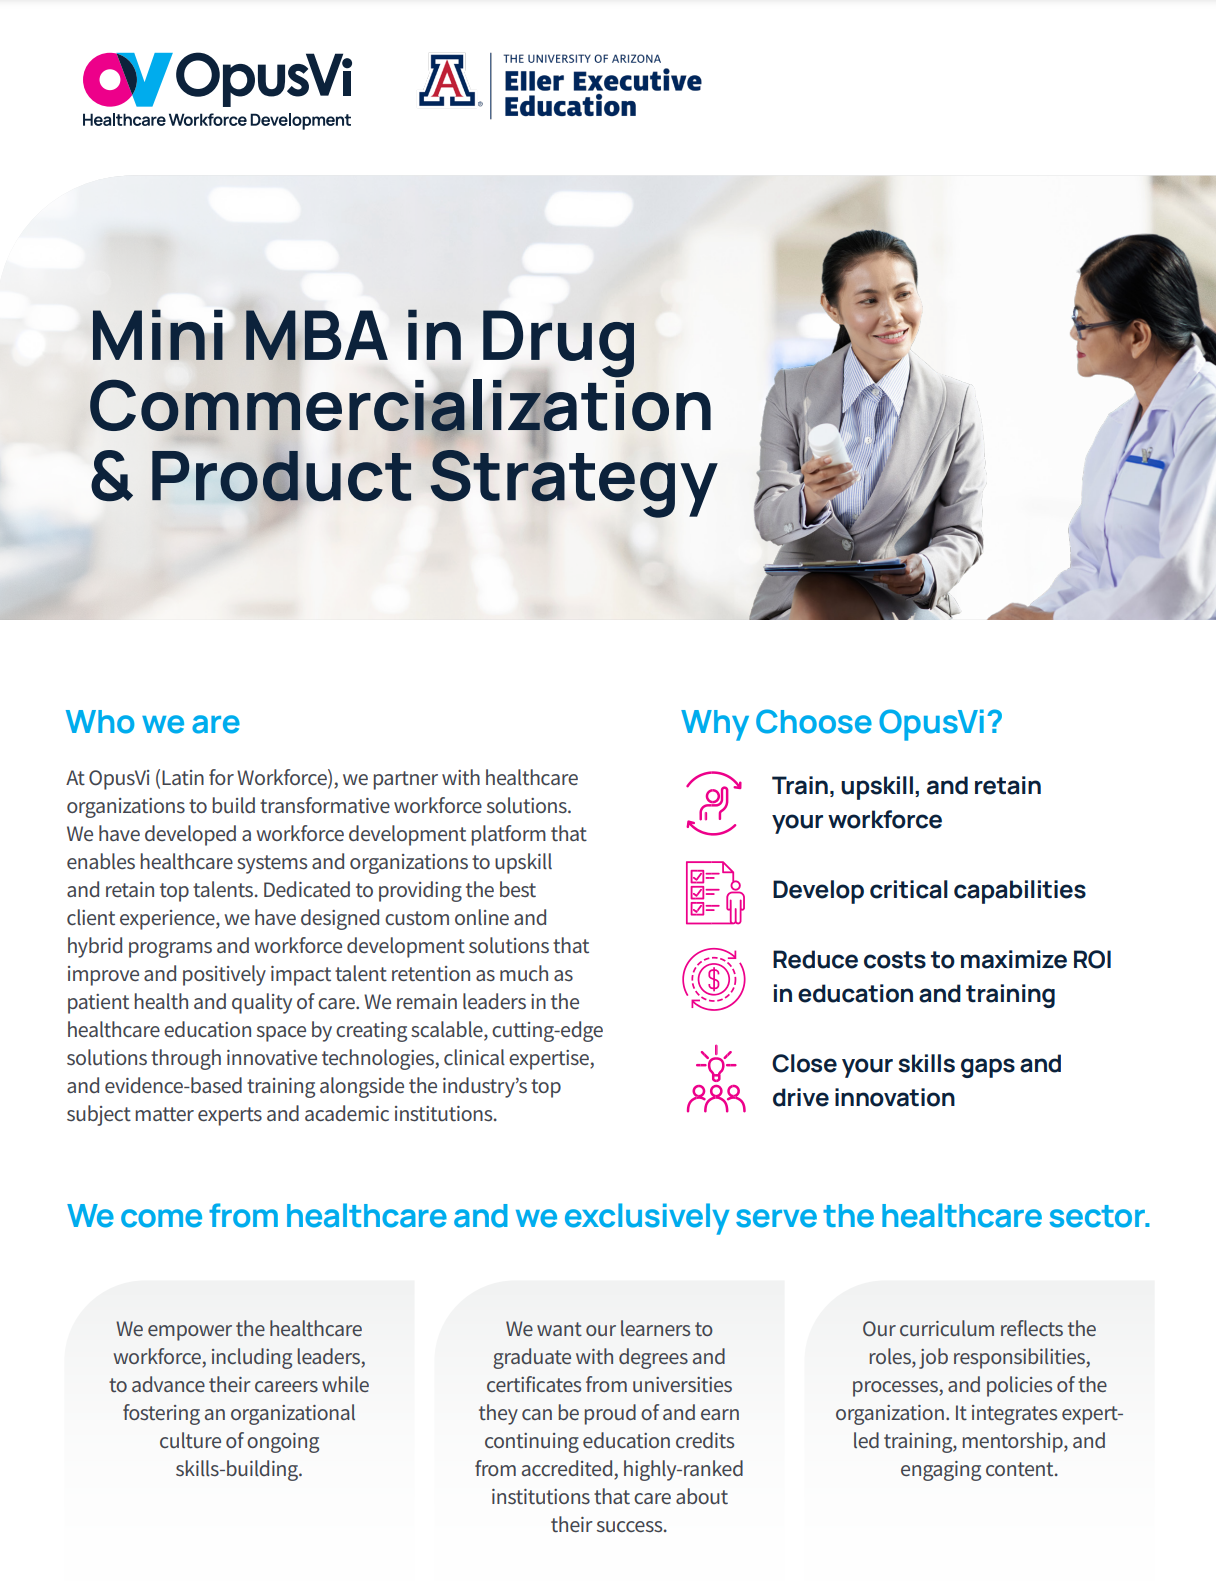 Mini-MBA in Drug Commercialization & Product Strategy